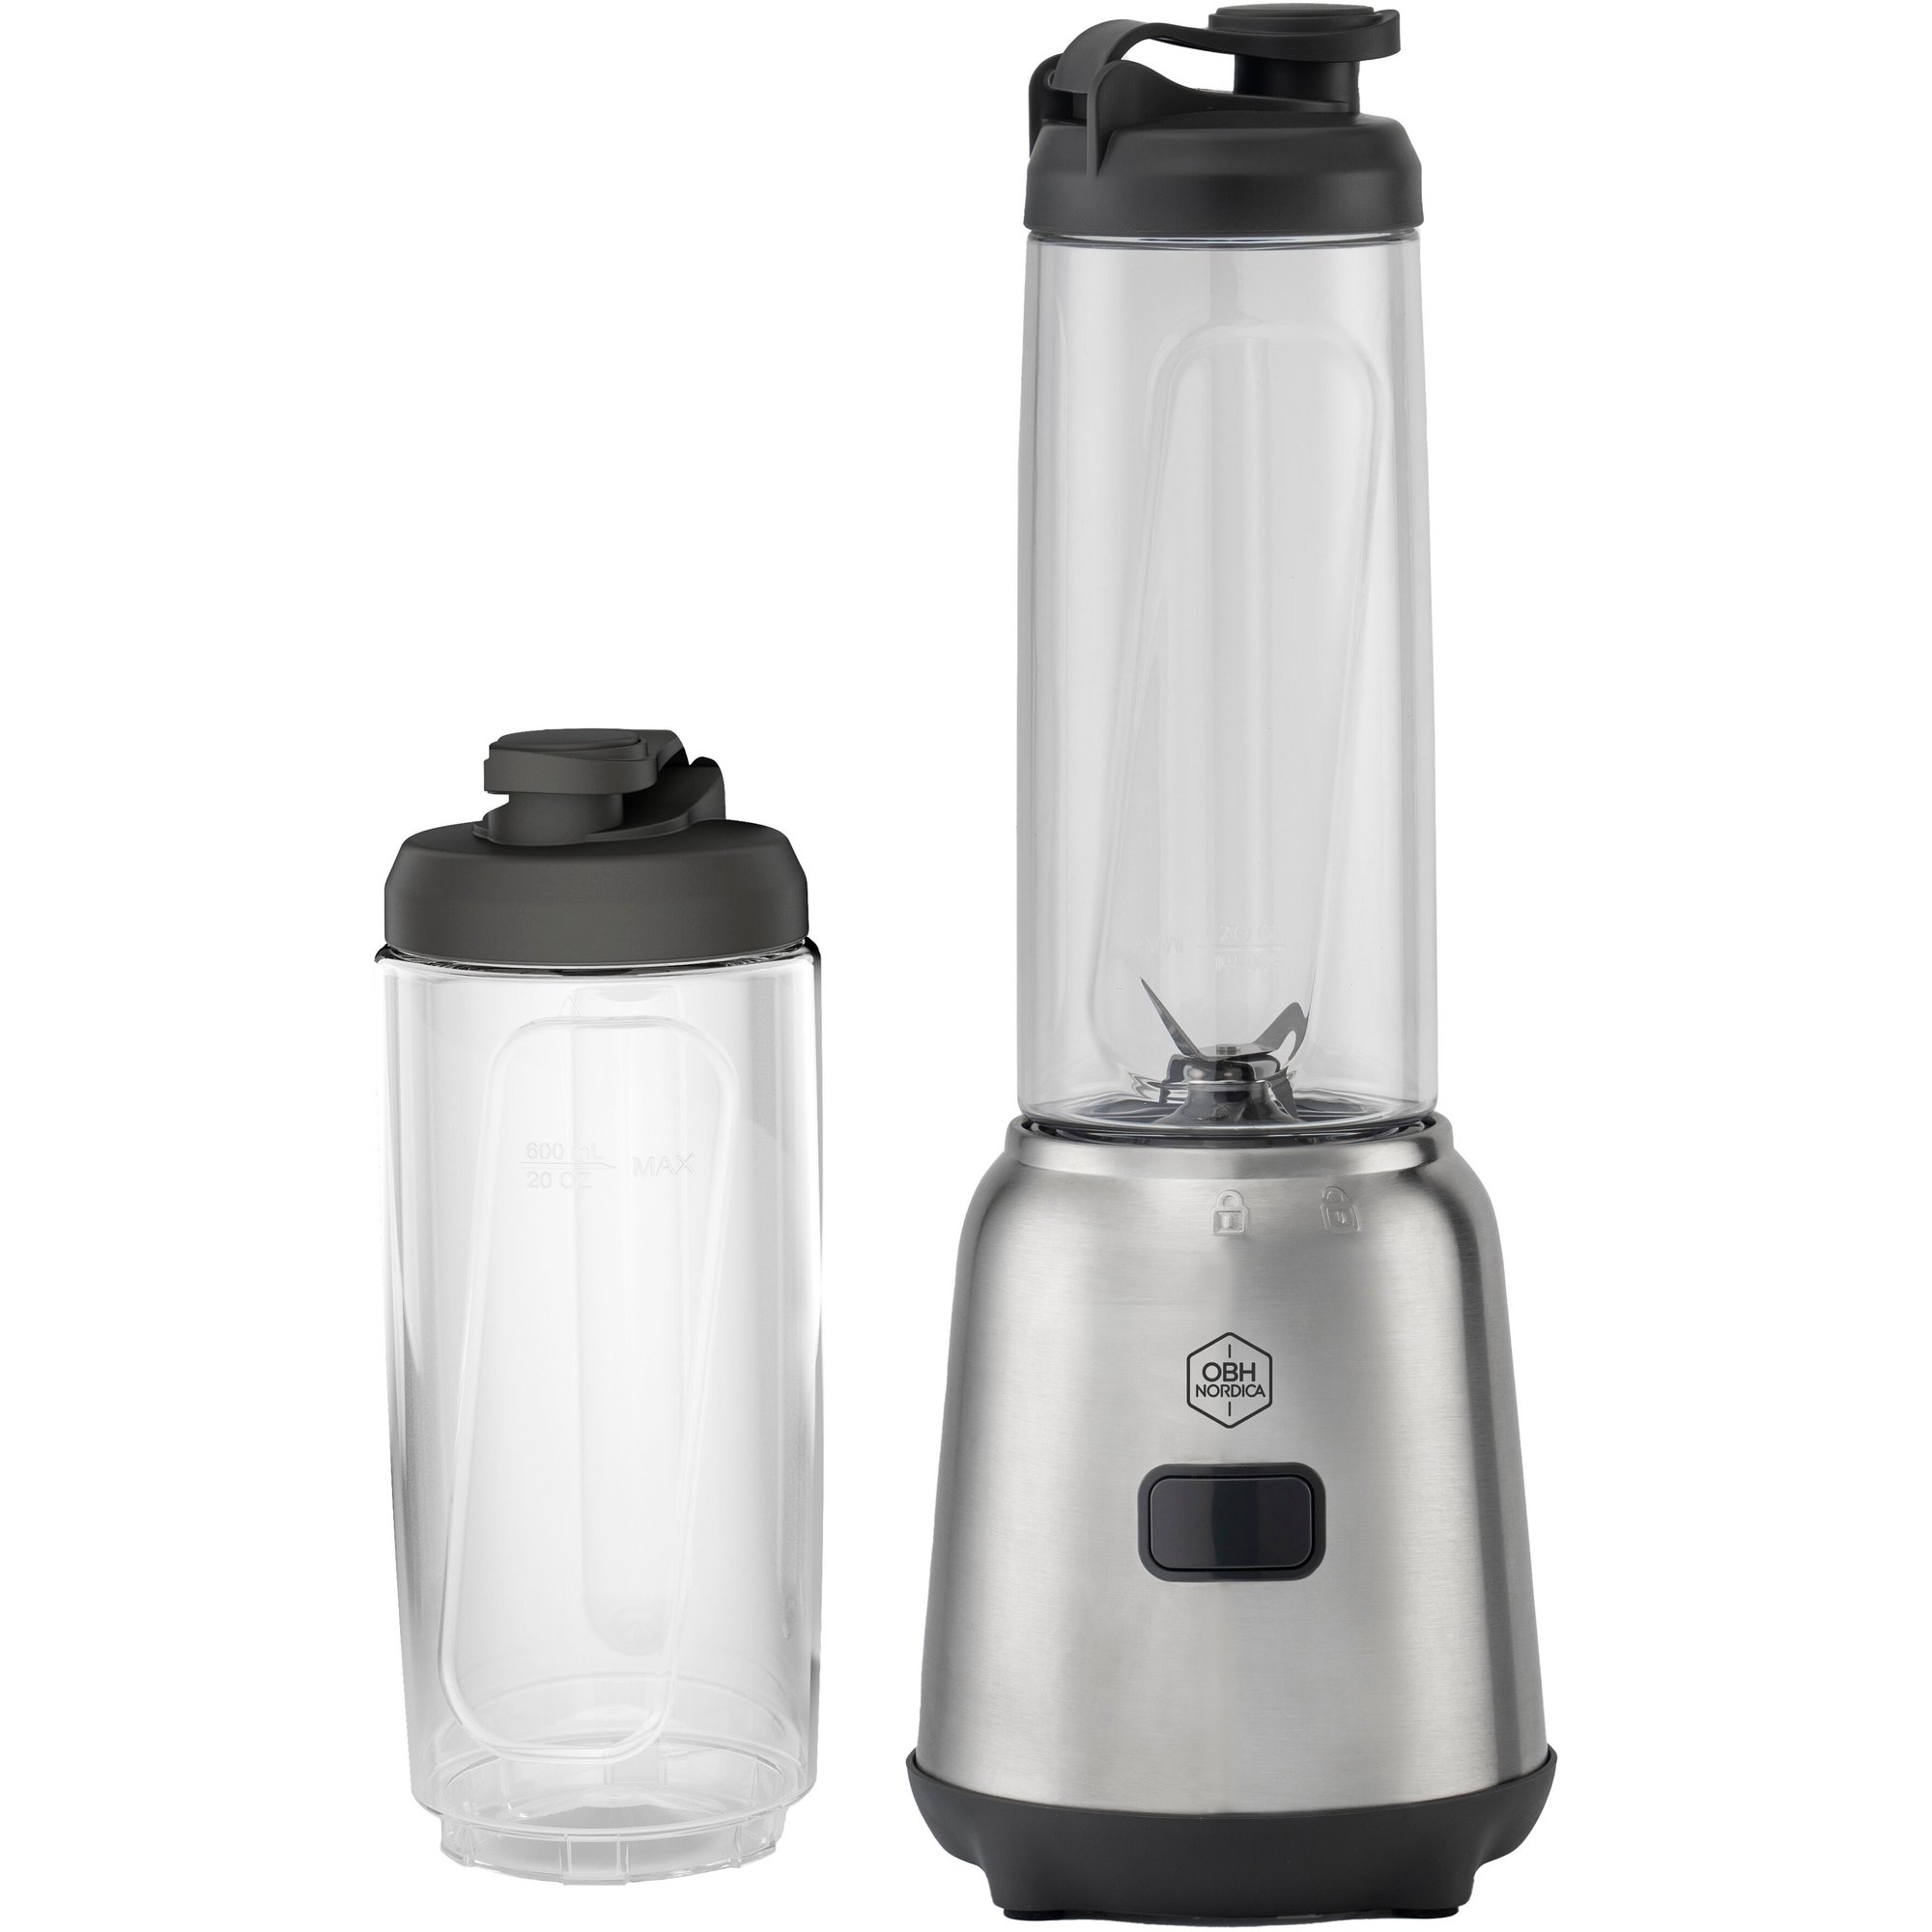 OBH Nordica smoothie blender Mix and Move 2 x 0,6l. 300 W